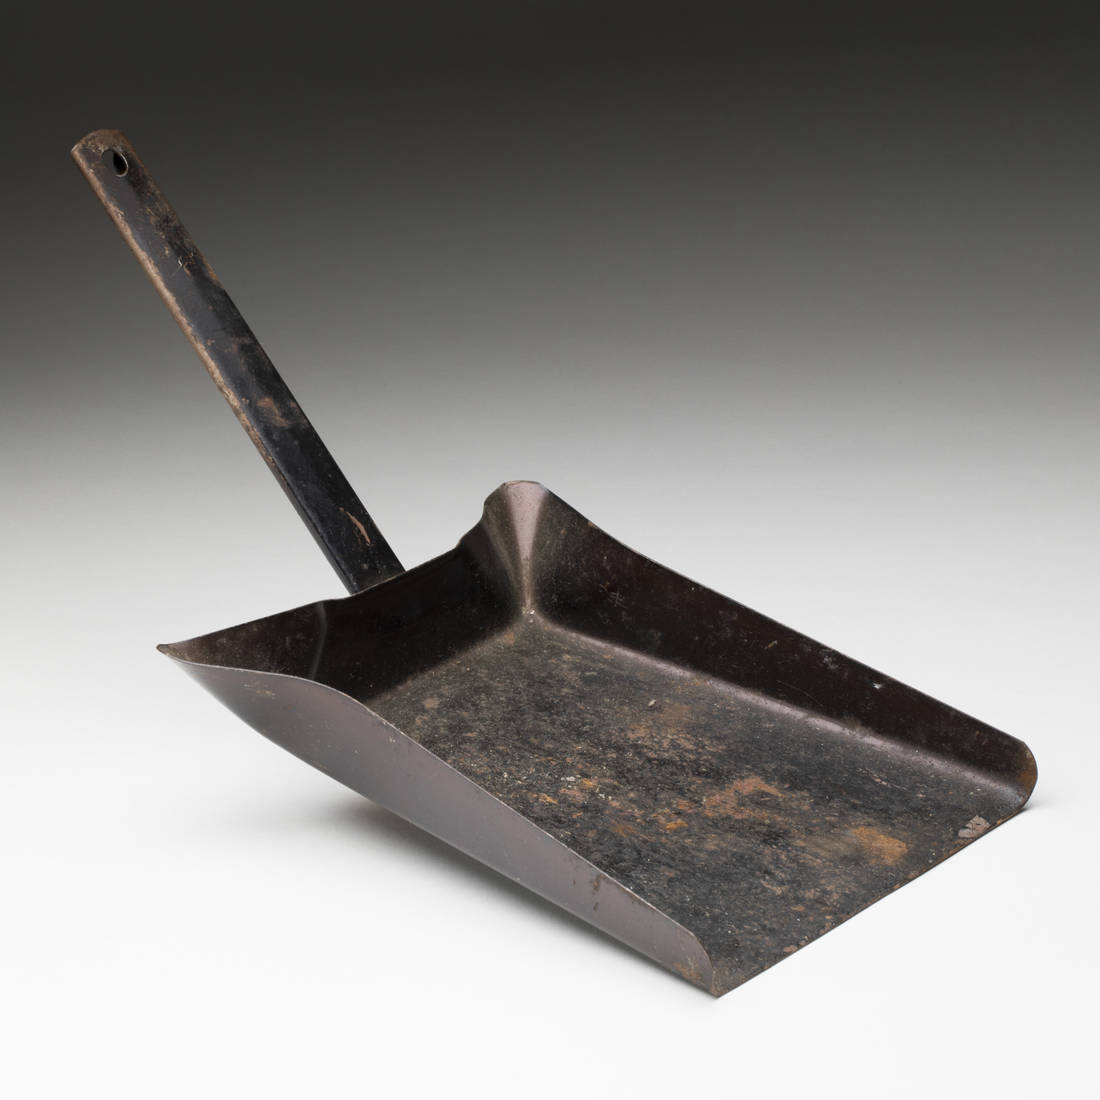 A dustpan made of metal and painted black. Three sides of the dust pan are curved up.